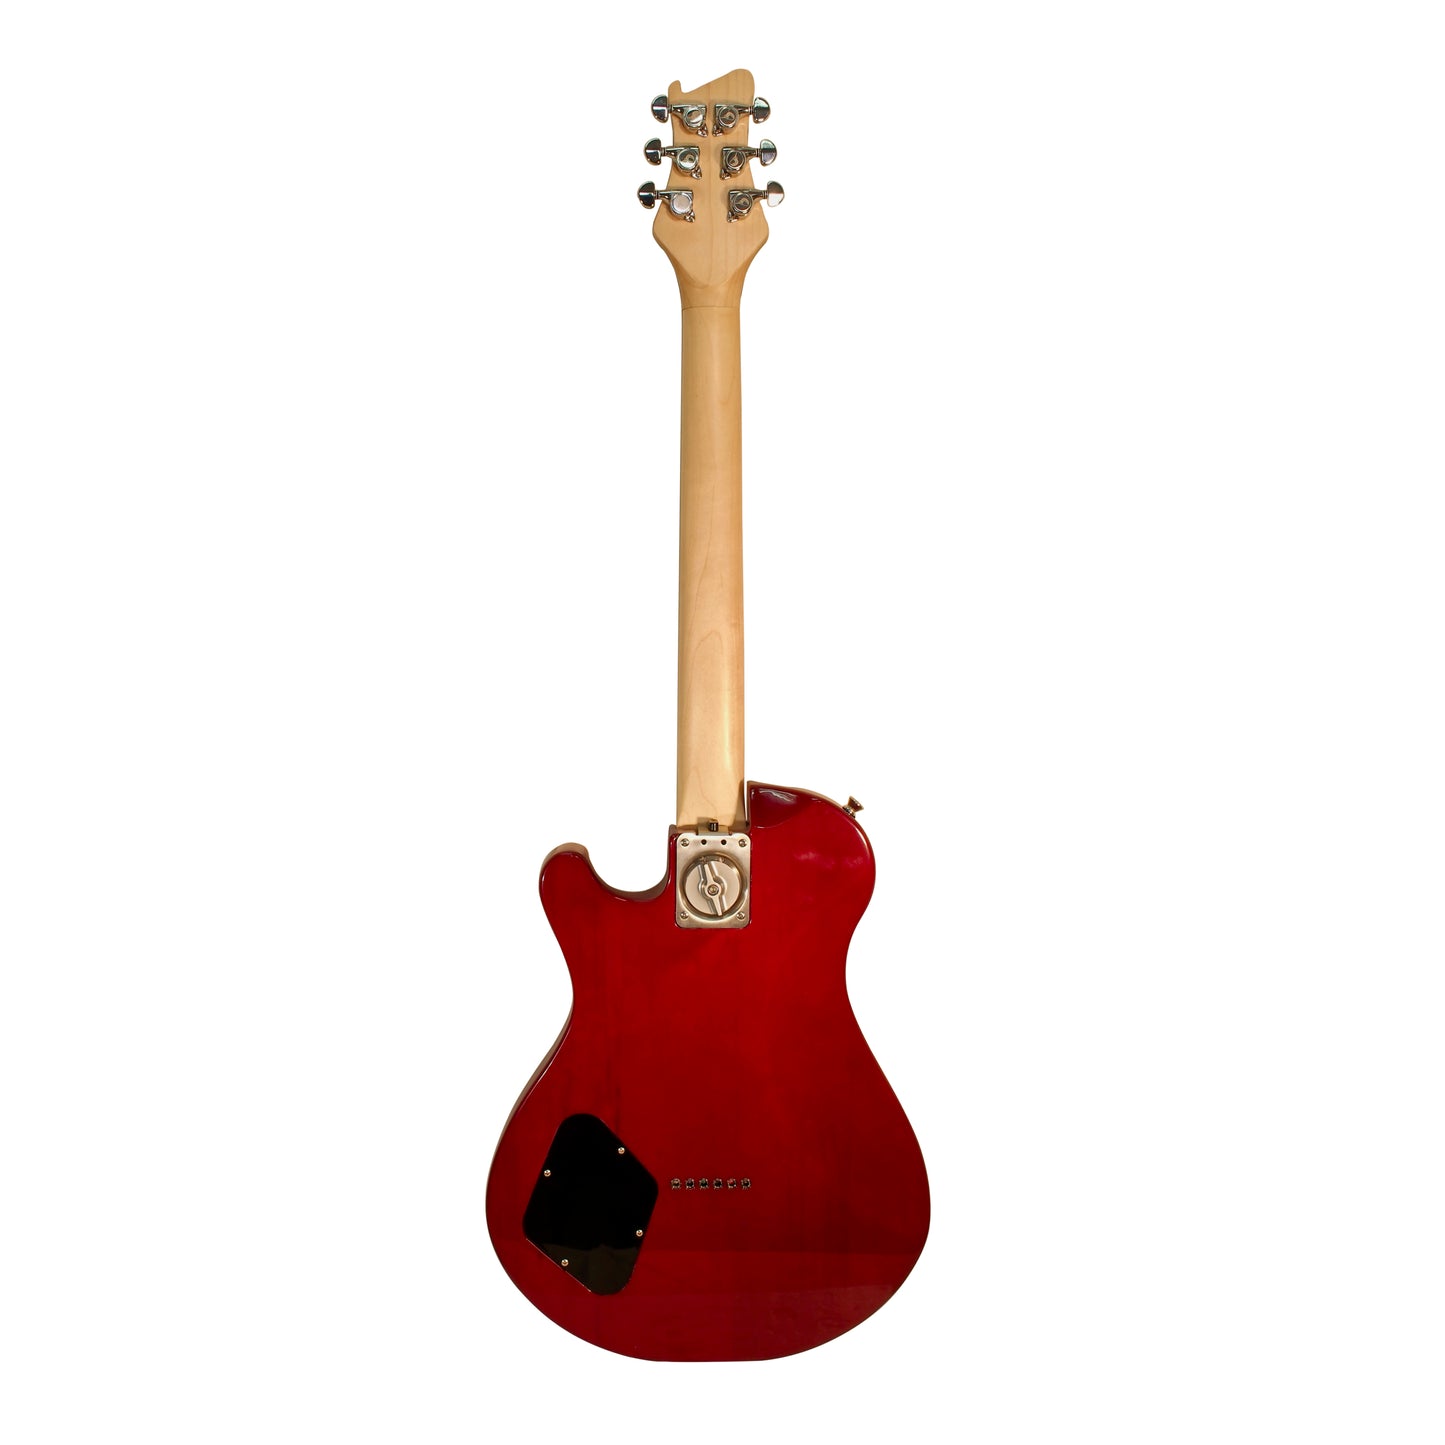 Journey Instruments OE990 Collapsable Electric Guitar - Cherry Burst